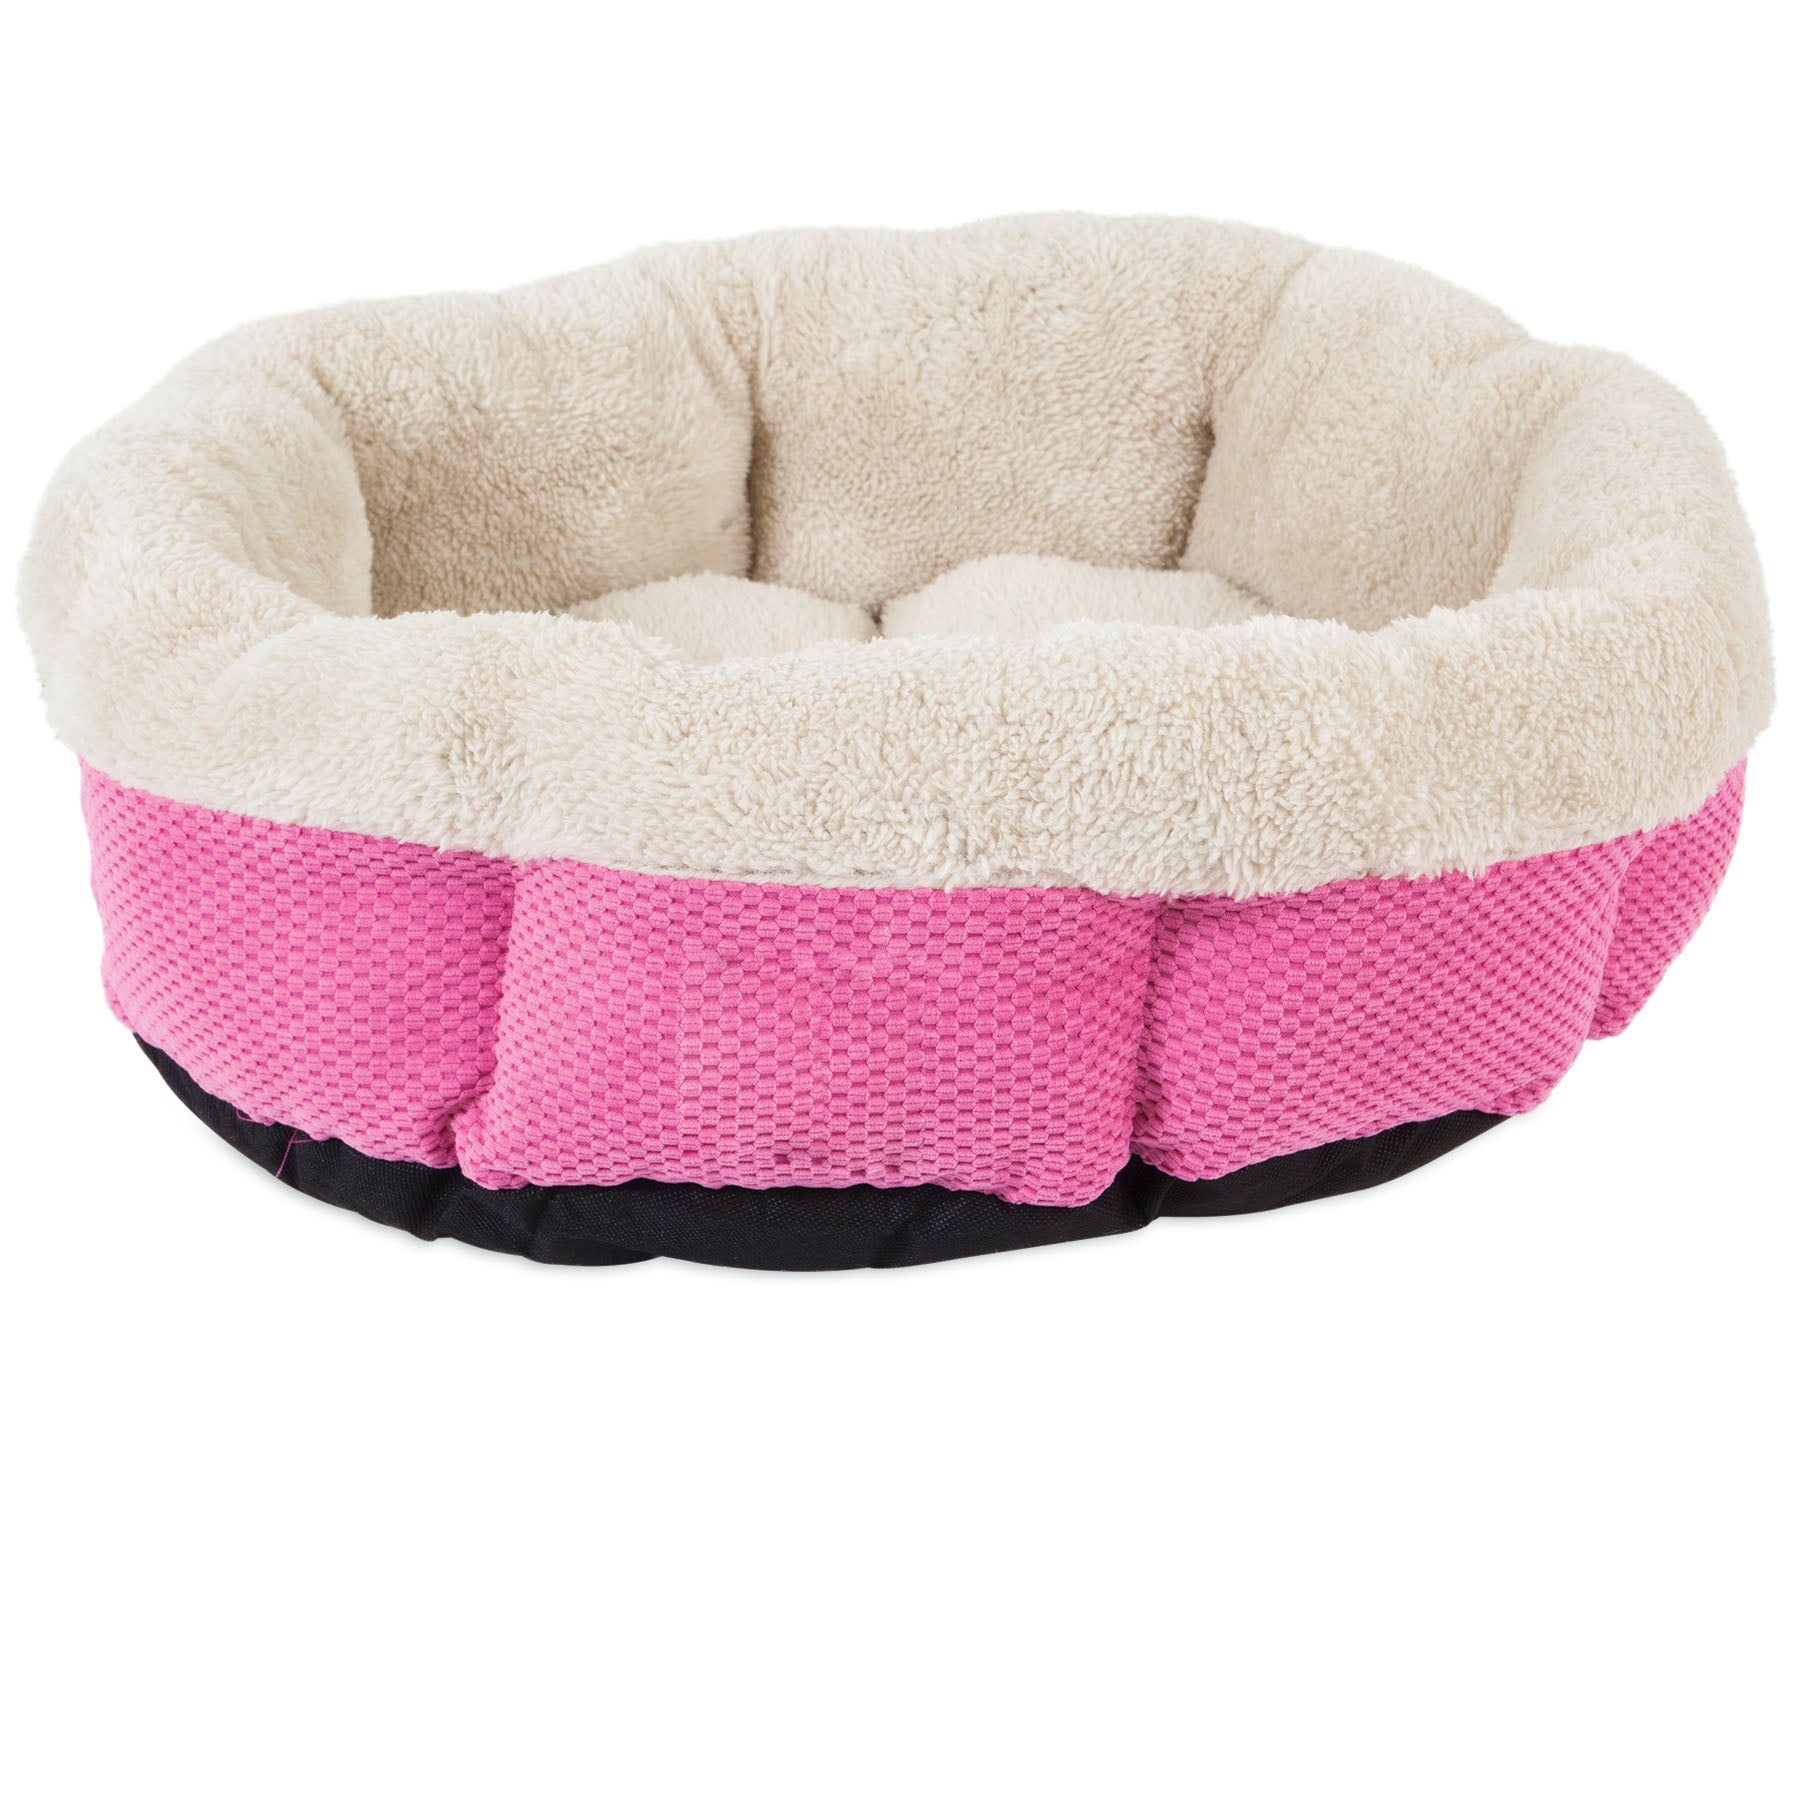 SnooZZy Mod Chic Shearling Round Bed - Pink